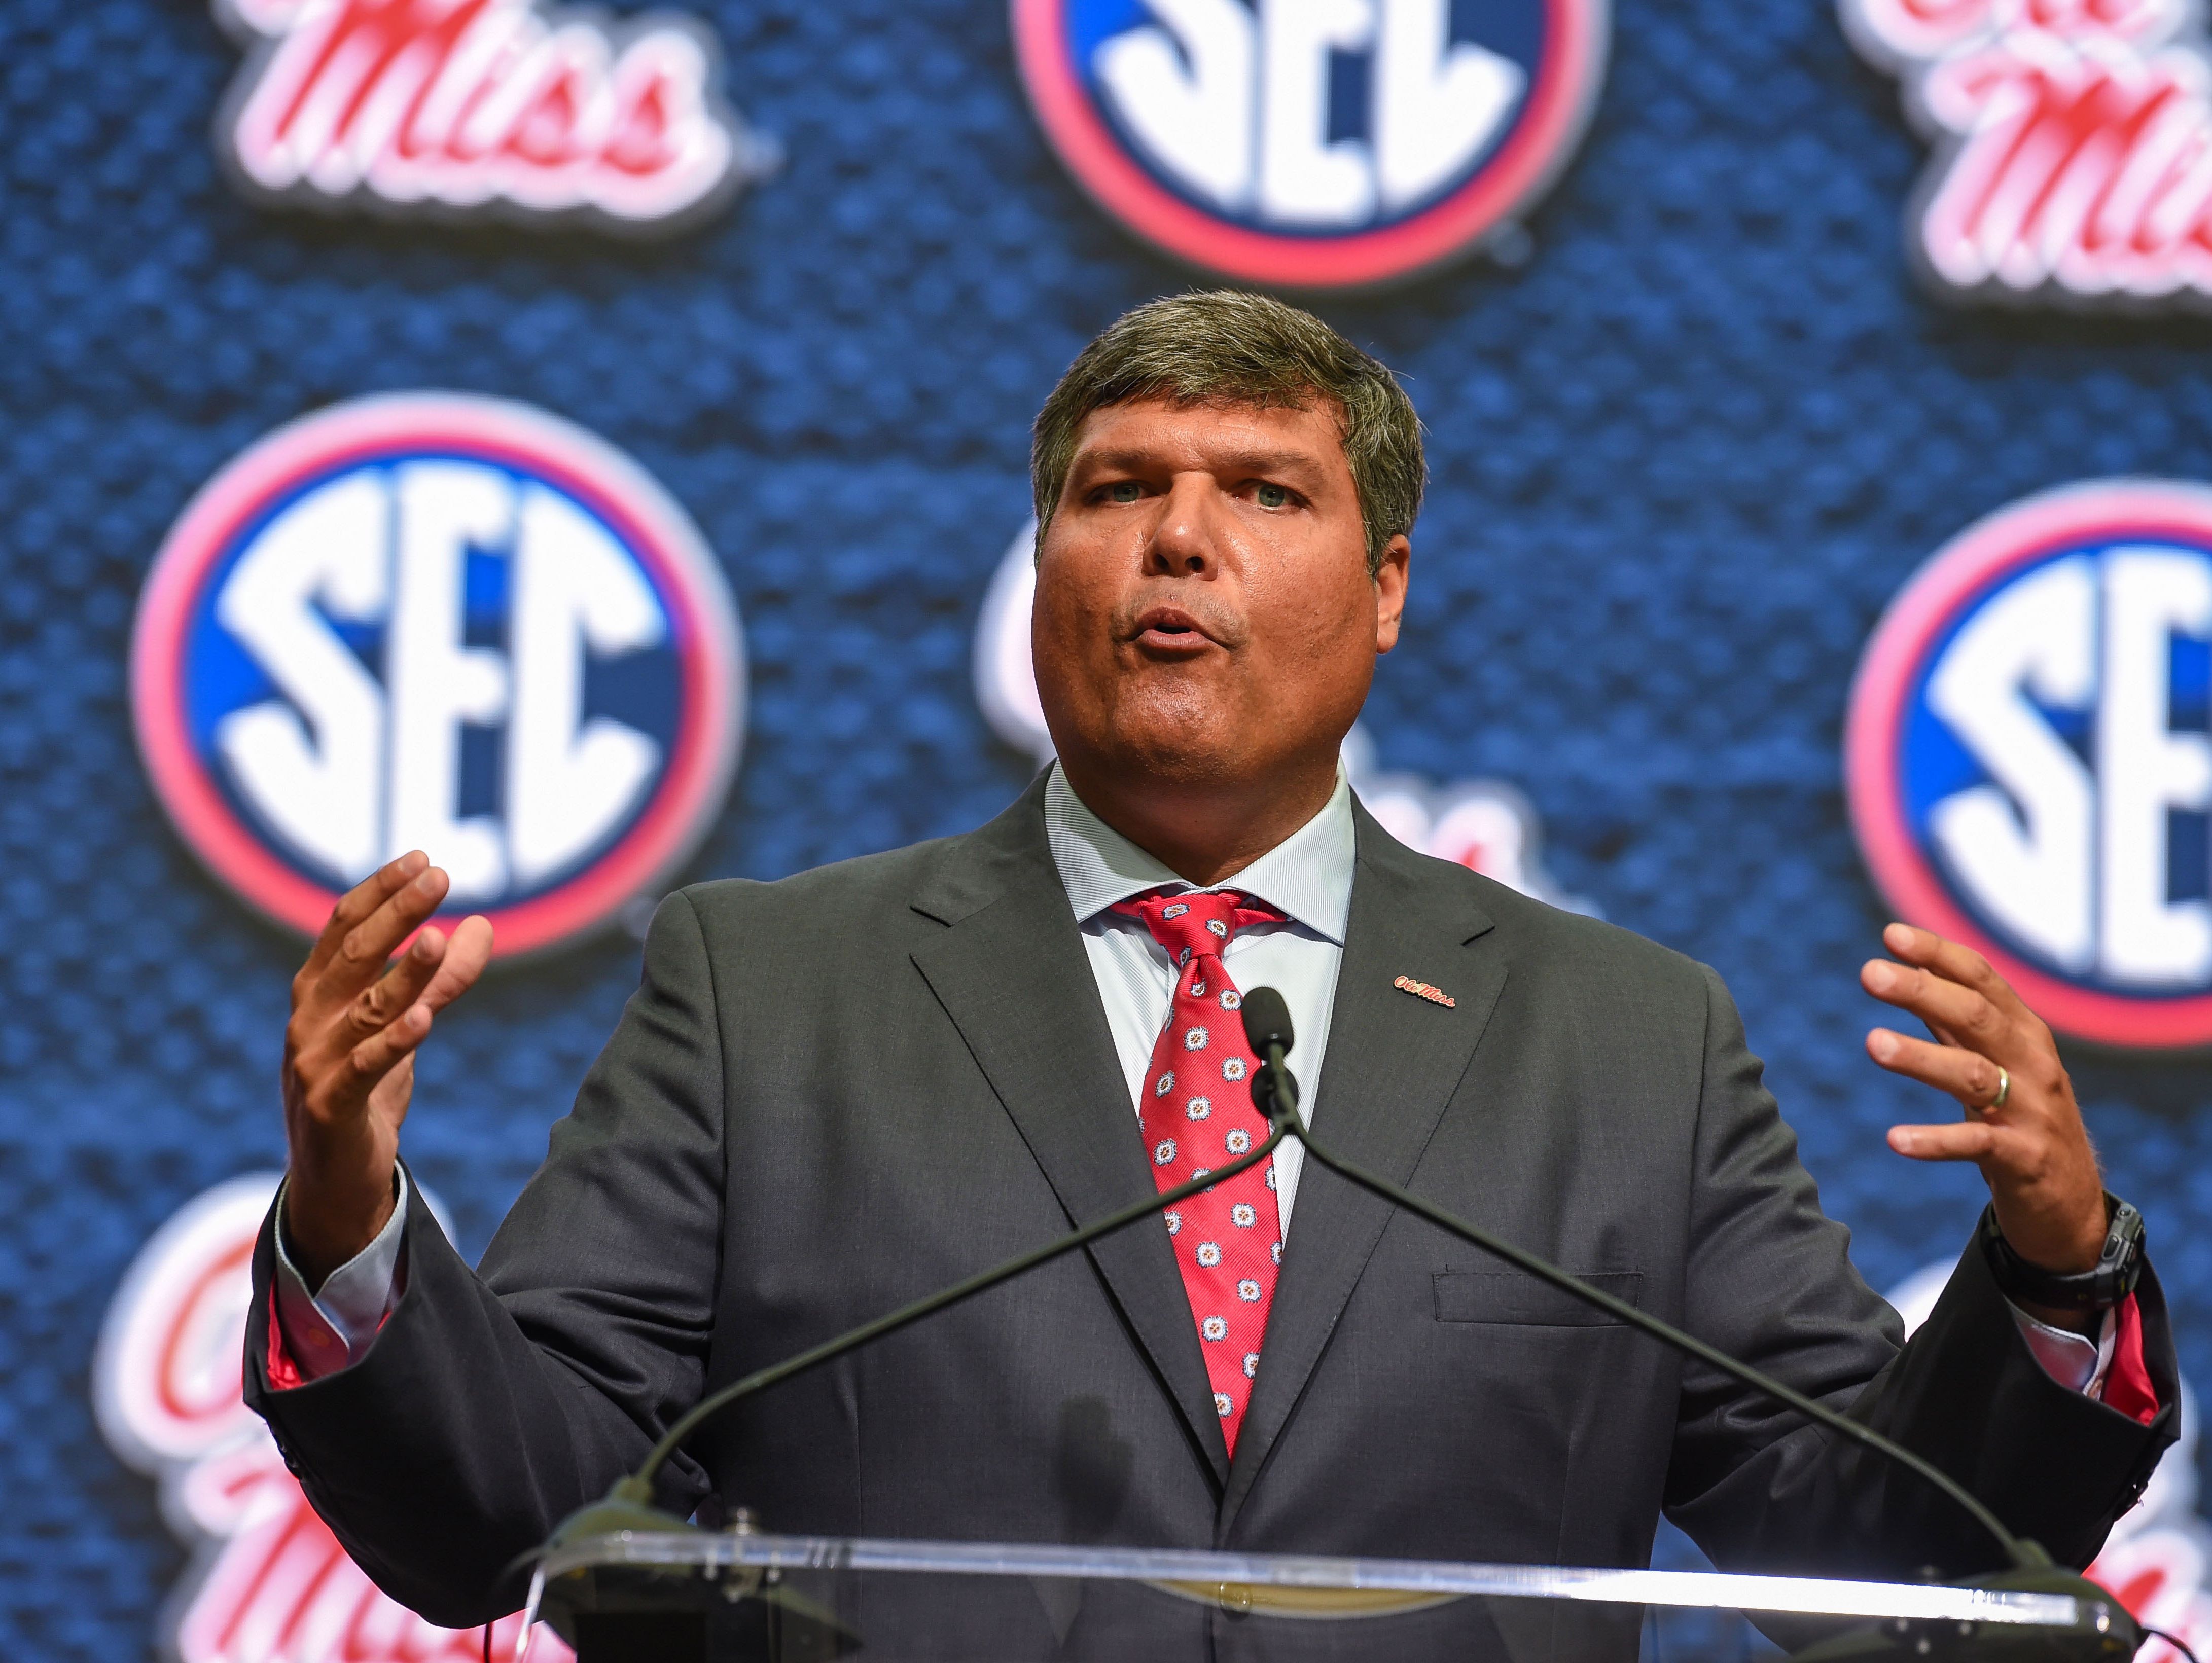 This is how Matt Luke found out a year ago he was going to be Ole Miss